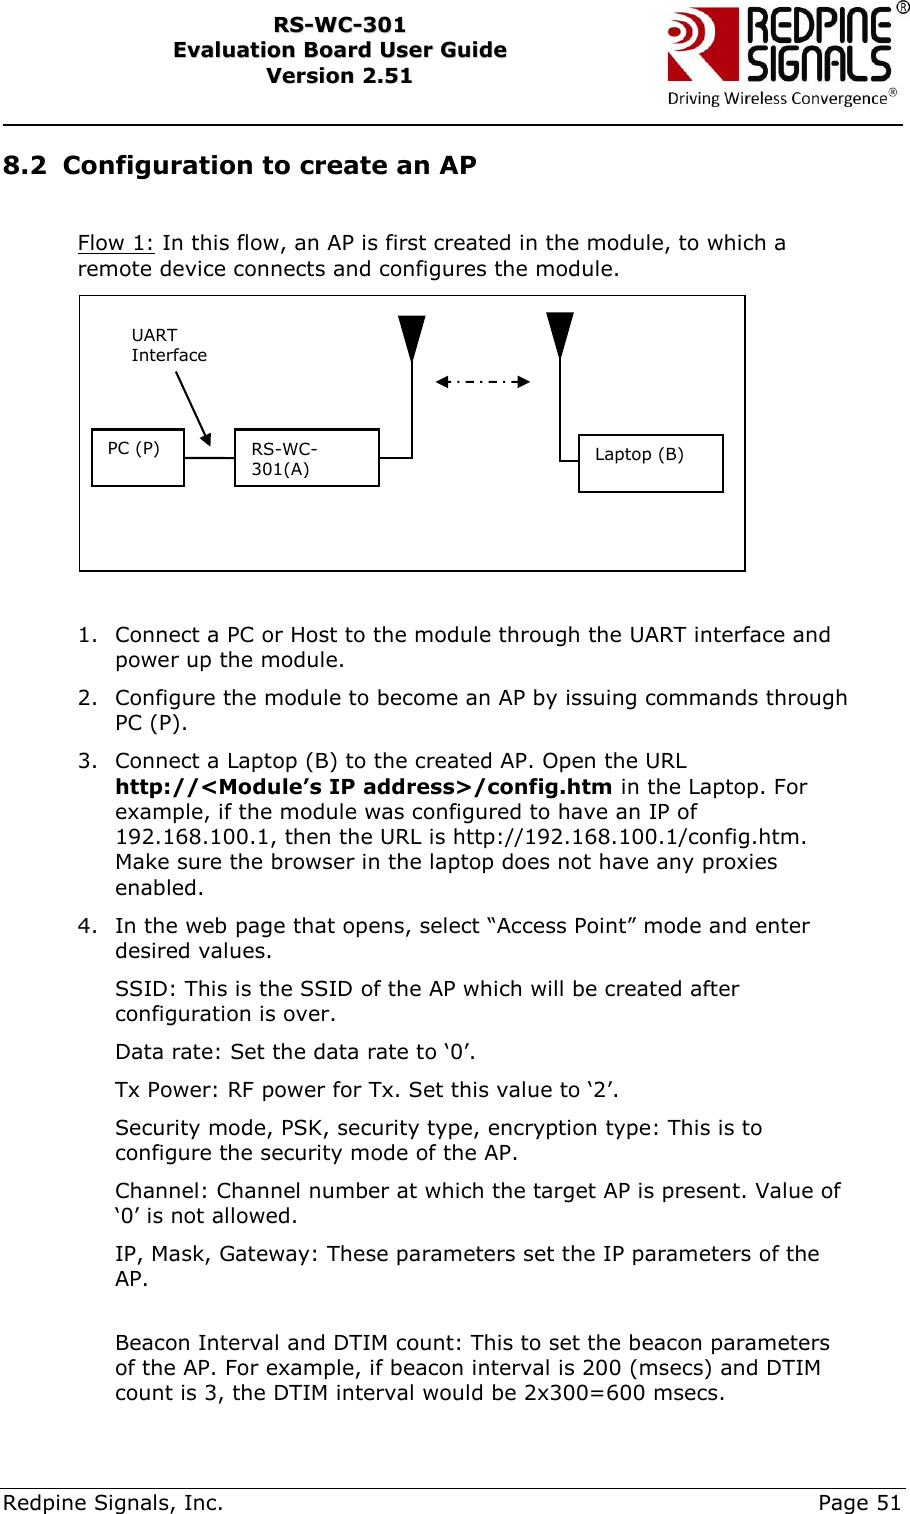     Redpine Signals, Inc.     Page 51 RRSS--WWCC--330011    EEvvaalluuaattiioonn  BBooaarrdd  UUsseerr  GGuuiiddee  VVeerrssiioonn  22..5511    8.2 Configuration to create an AP  Flow 1: In this flow, an AP is first created in the module, to which a remote device connects and configures the module.   1. Connect a PC or Host to the module through the UART interface and power up the module. 2. Configure the module to become an AP by issuing commands through PC (P).  3. Connect a Laptop (B) to the created AP. Open the URL http://&lt;Module’s IP address&gt;/config.htm in the Laptop. For example, if the module was configured to have an IP of 192.168.100.1, then the URL is http://192.168.100.1/config.htm. Make sure the browser in the laptop does not have any proxies enabled. 4. In the web page that opens, select “Access Point” mode and enter desired values.  SSID: This is the SSID of the AP which will be created after configuration is over. Data rate: Set the data rate to „0‟. Tx Power: RF power for Tx. Set this value to „2‟. Security mode, PSK, security type, encryption type: This is to configure the security mode of the AP. Channel: Channel number at which the target AP is present. Value of „0‟ is not allowed. IP, Mask, Gateway: These parameters set the IP parameters of the AP.  Beacon Interval and DTIM count: This to set the beacon parameters of the AP. For example, if beacon interval is 200 (msecs) and DTIM count is 3, the DTIM interval would be 2x300=600 msecs. PC (P) RS-WC-301(A) UART Interface Laptop (B) 